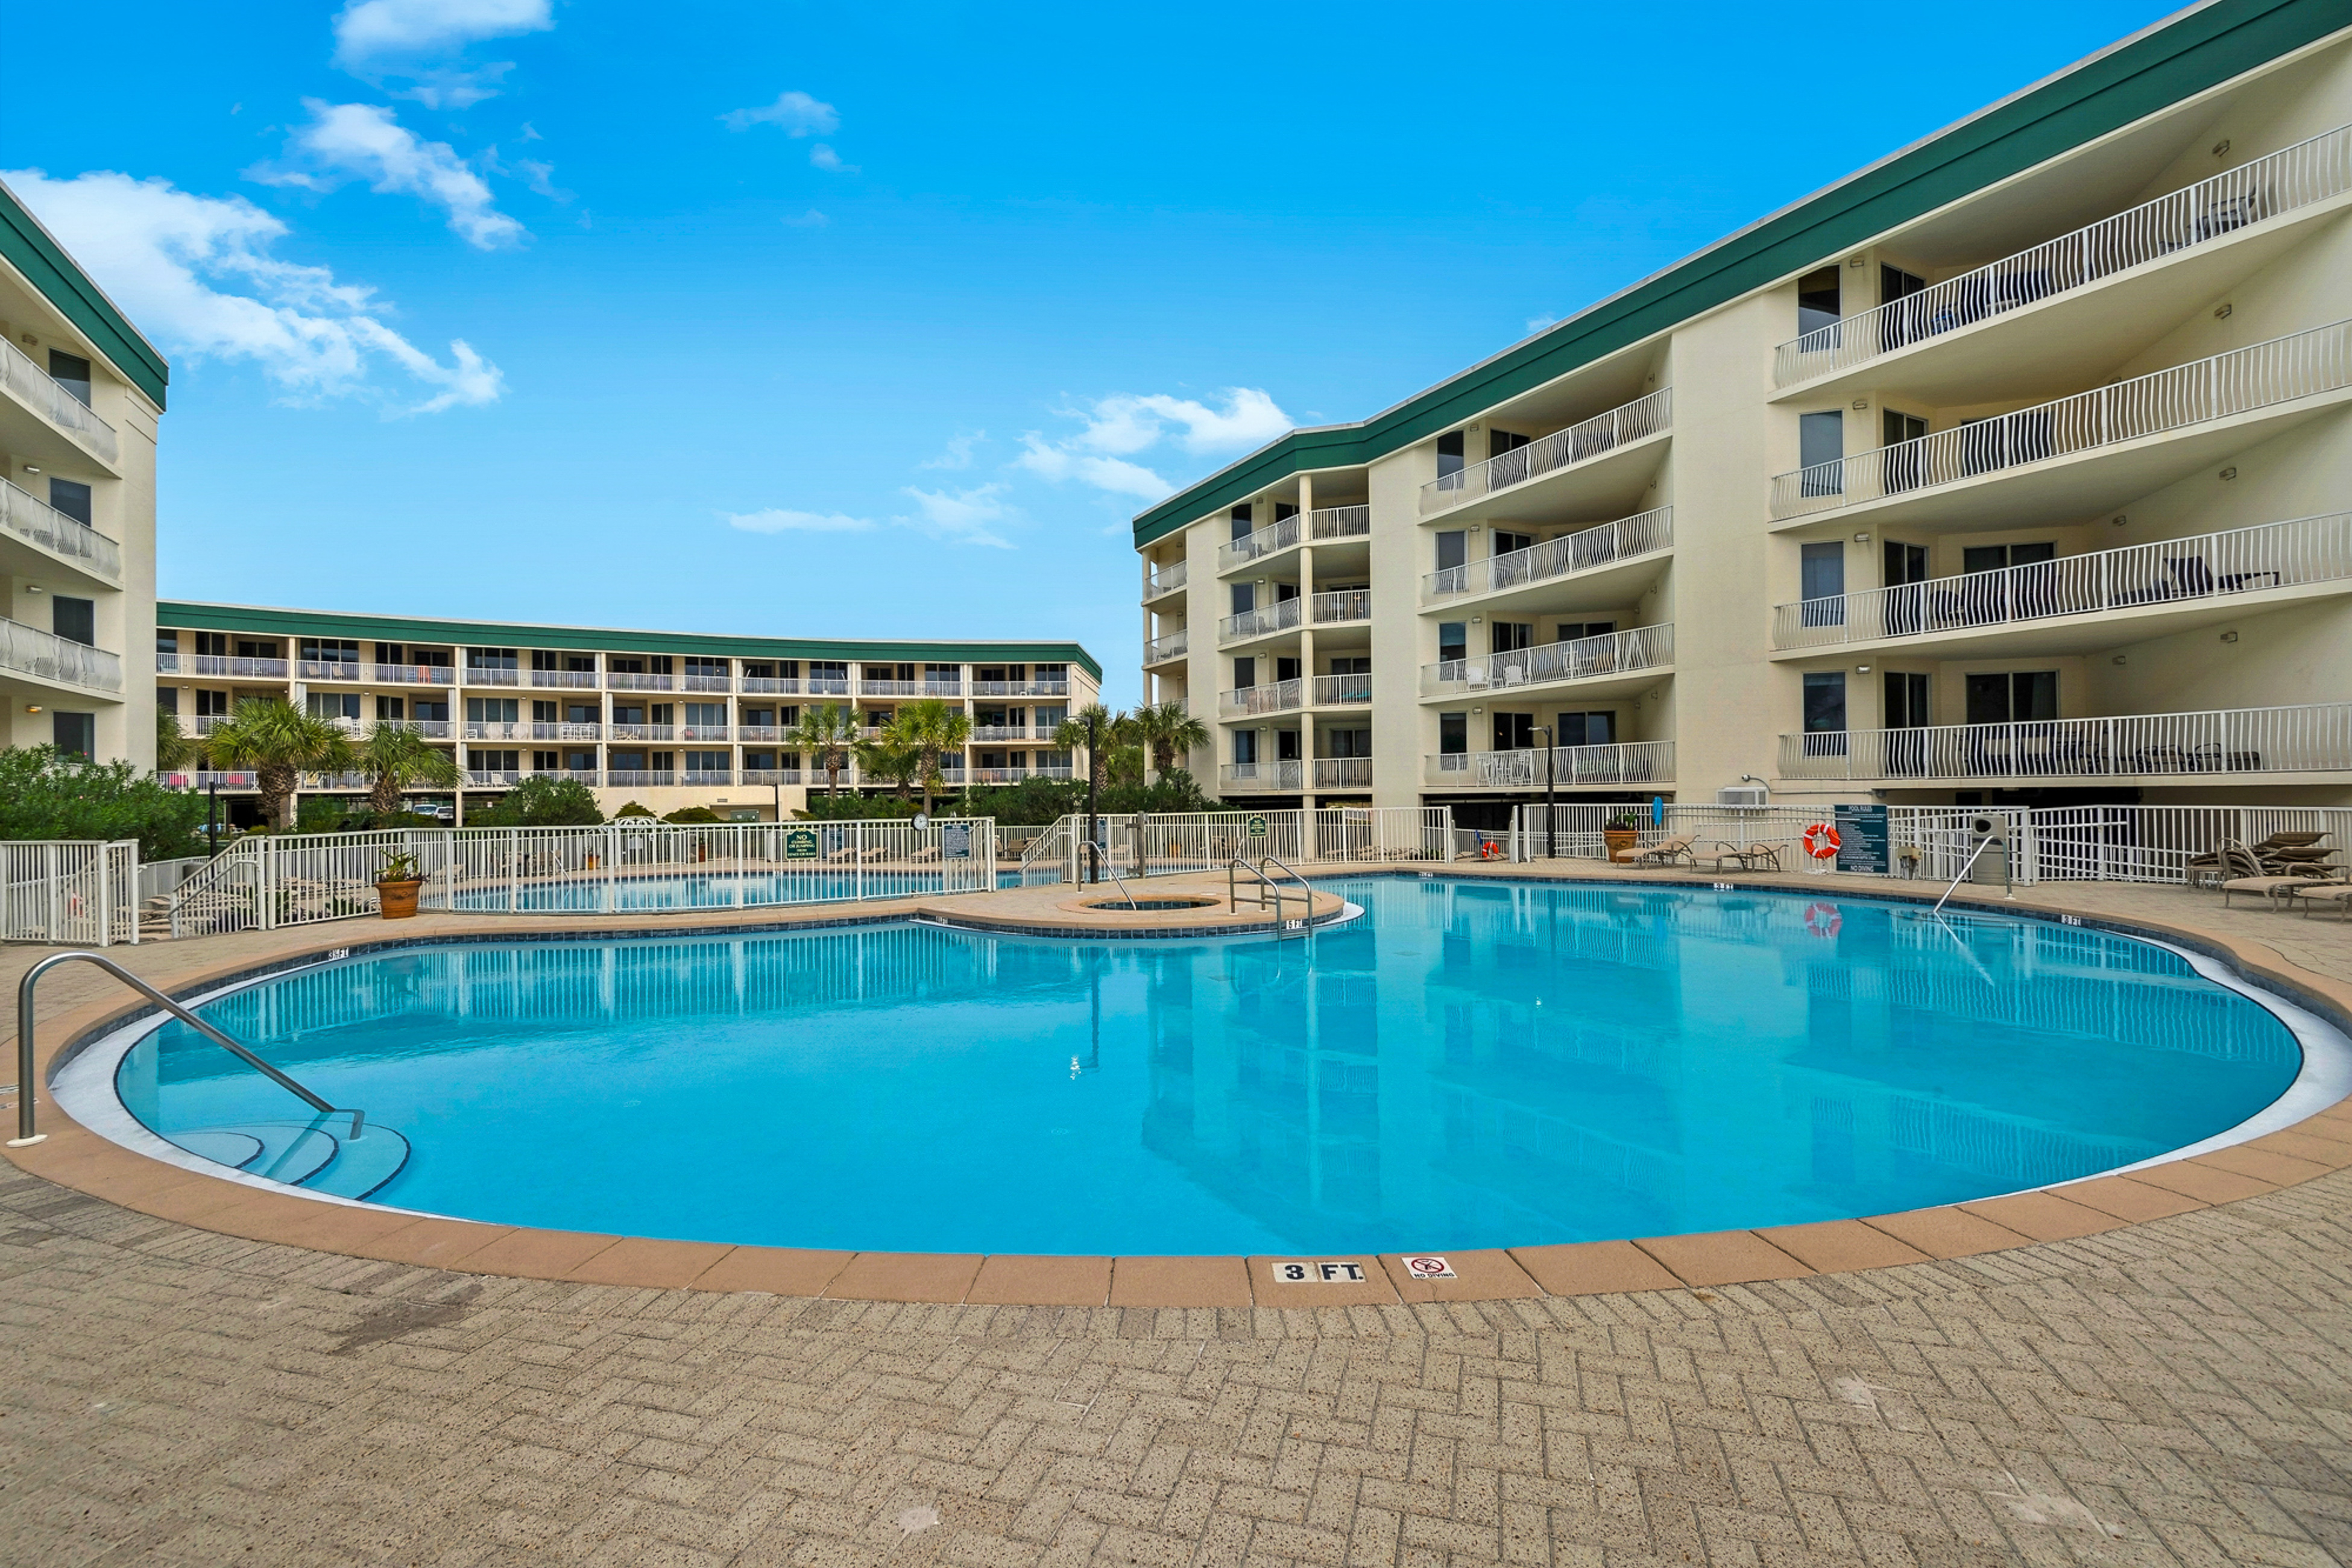 Dunes of Seagrove A205 Condo rental in Dunes of Seagrove in Highway 30-A Florida - #37